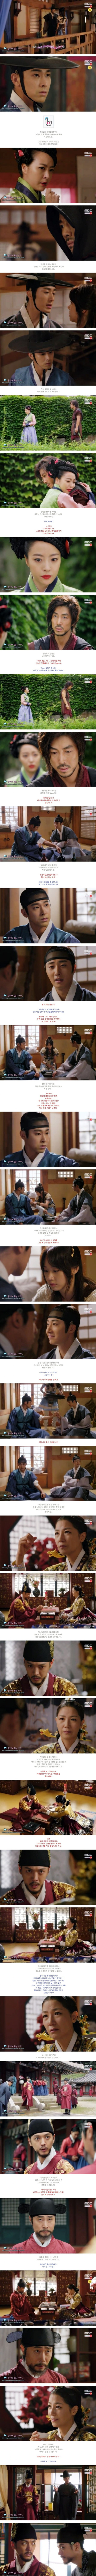 episode 8 captures for the Korean drama 'The Night Watchman's Journal'